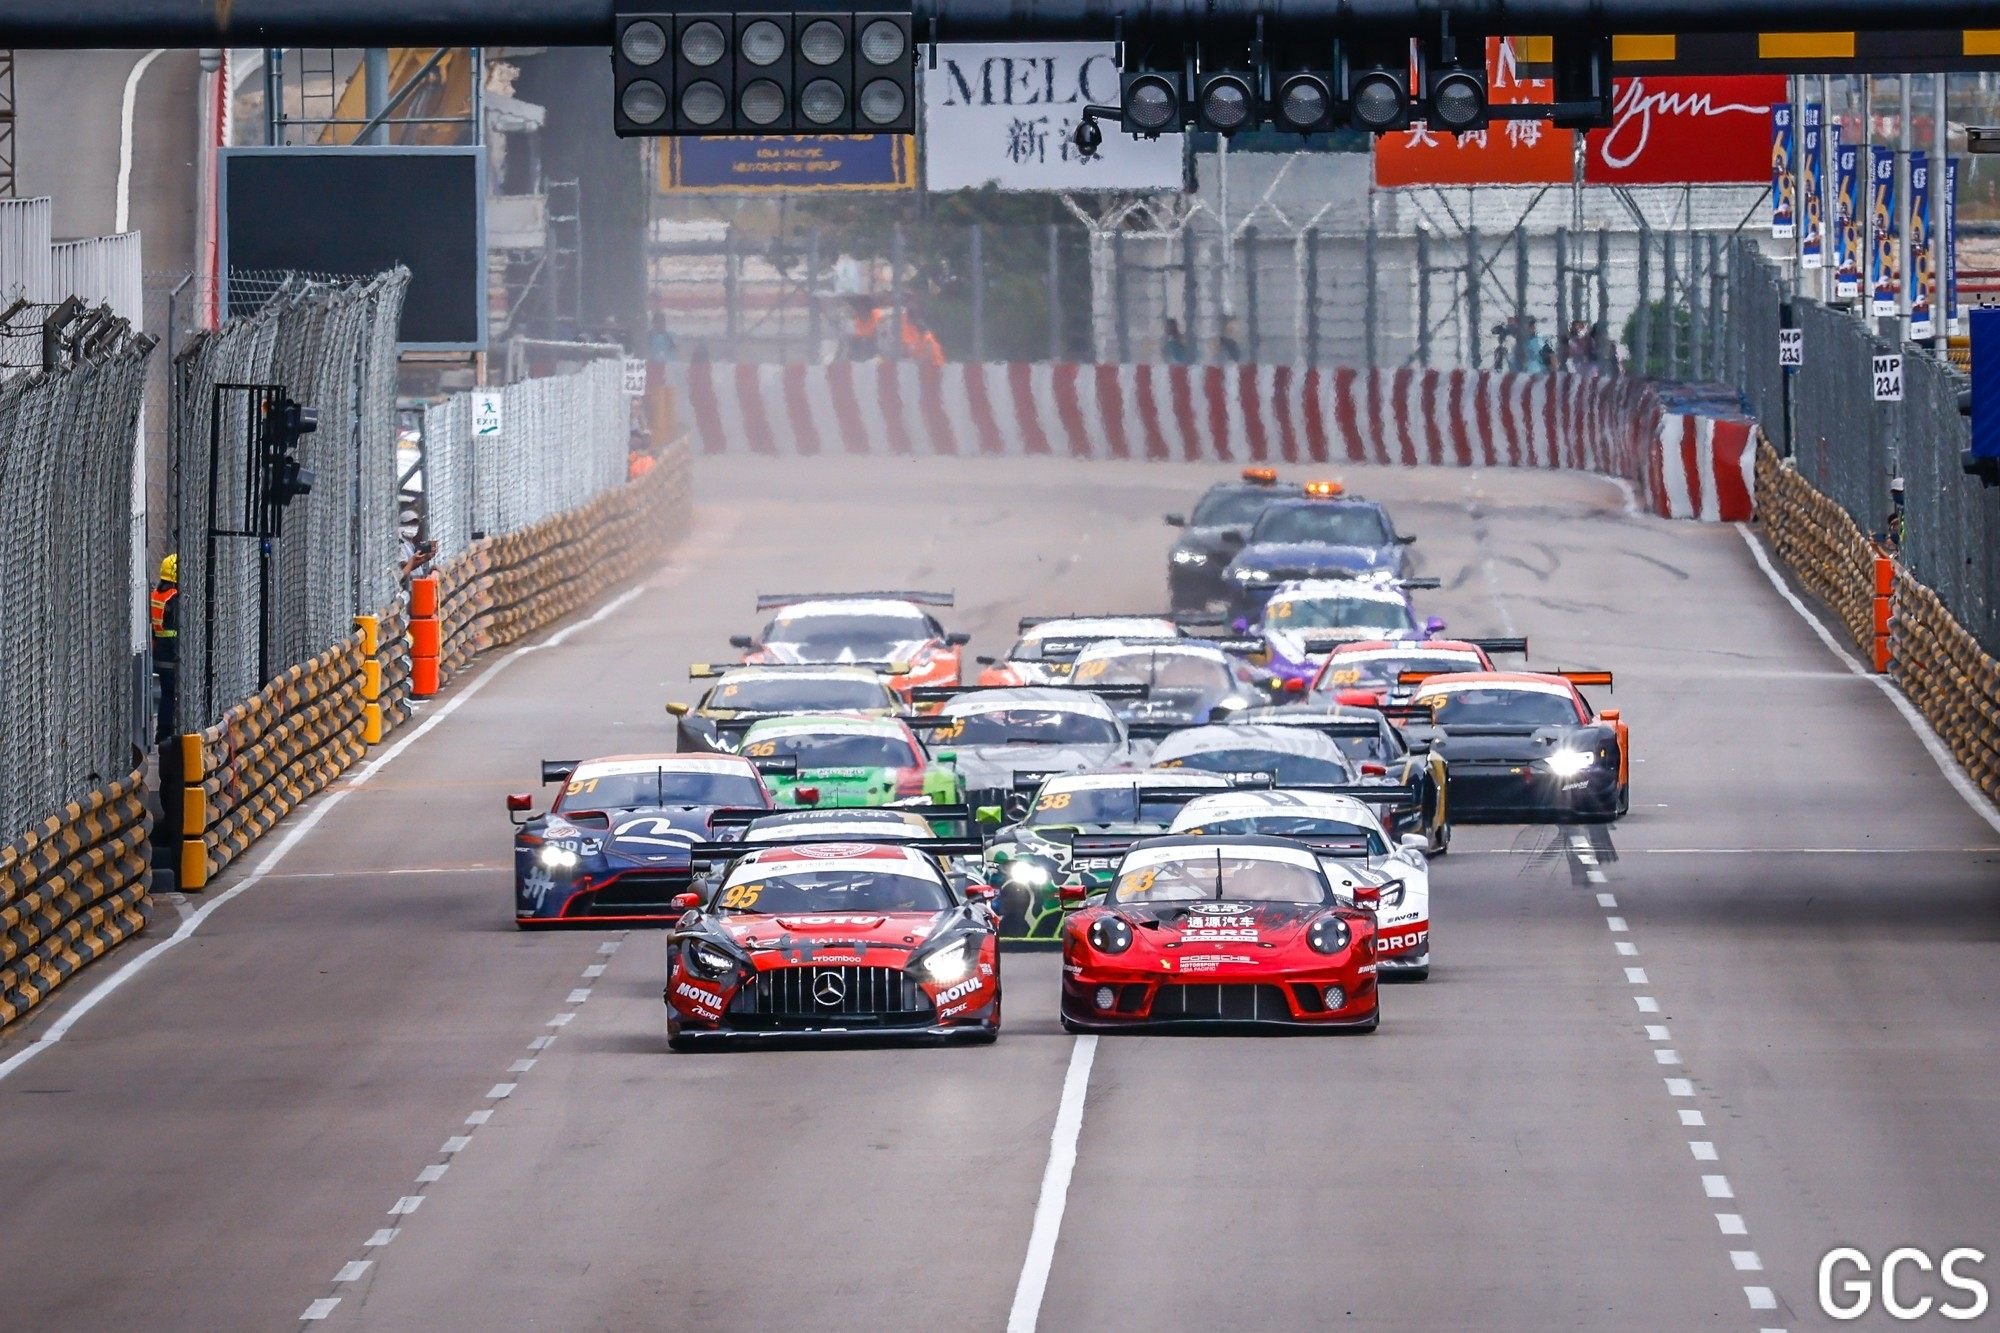 Hong Kong racer Darryl O’Young (front row, left) at the start line of the Macau Grand Prix GT Cup final round. Photo: Macau Grand Prix